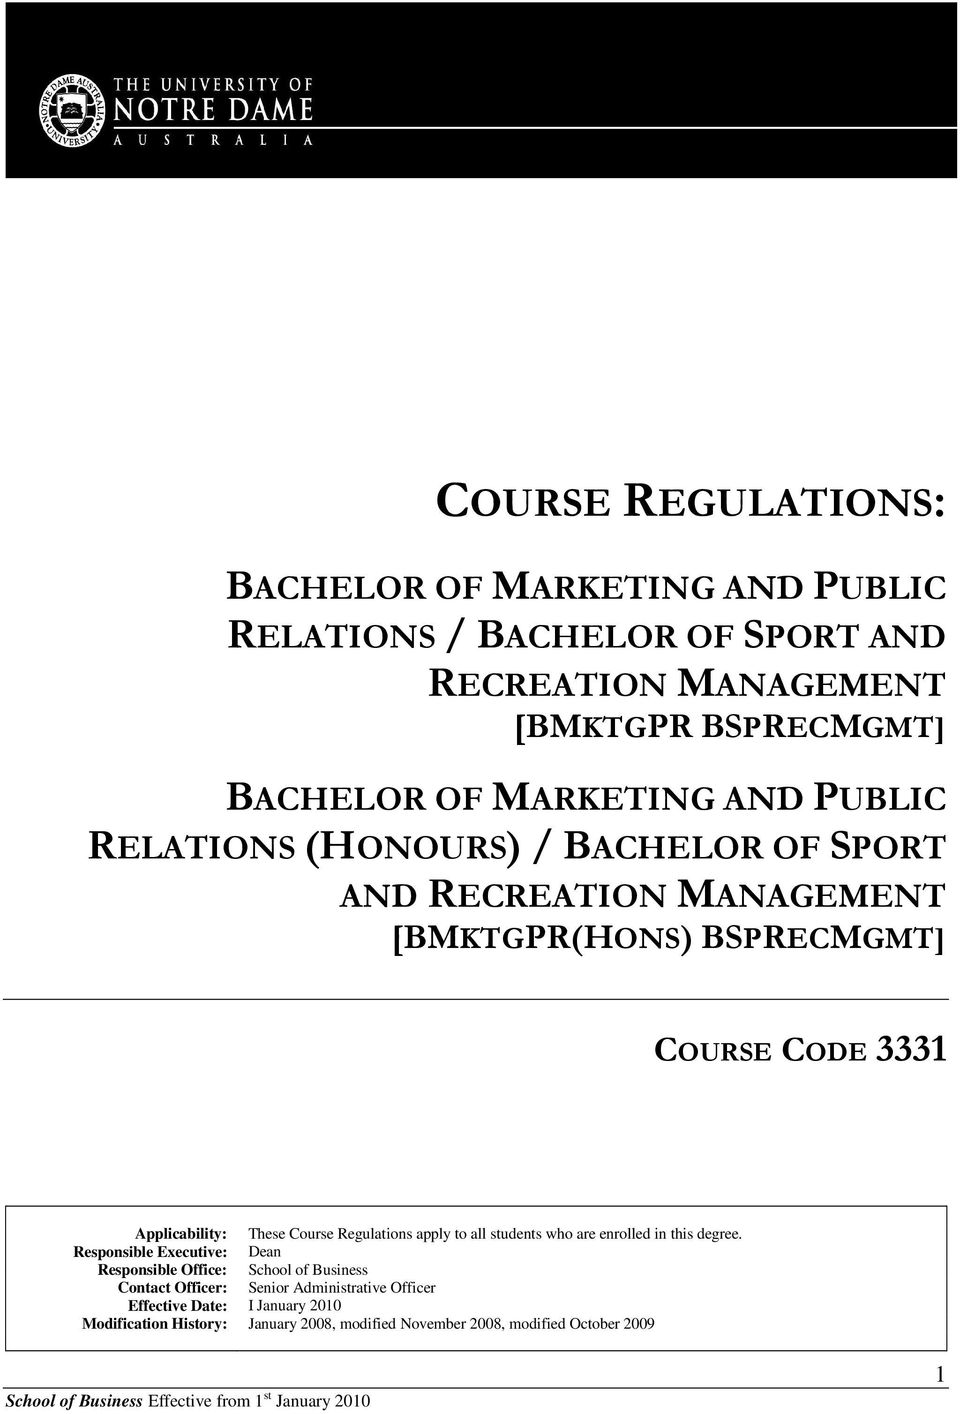 These Course Regulations apply to all students who are enrolled in this degree.